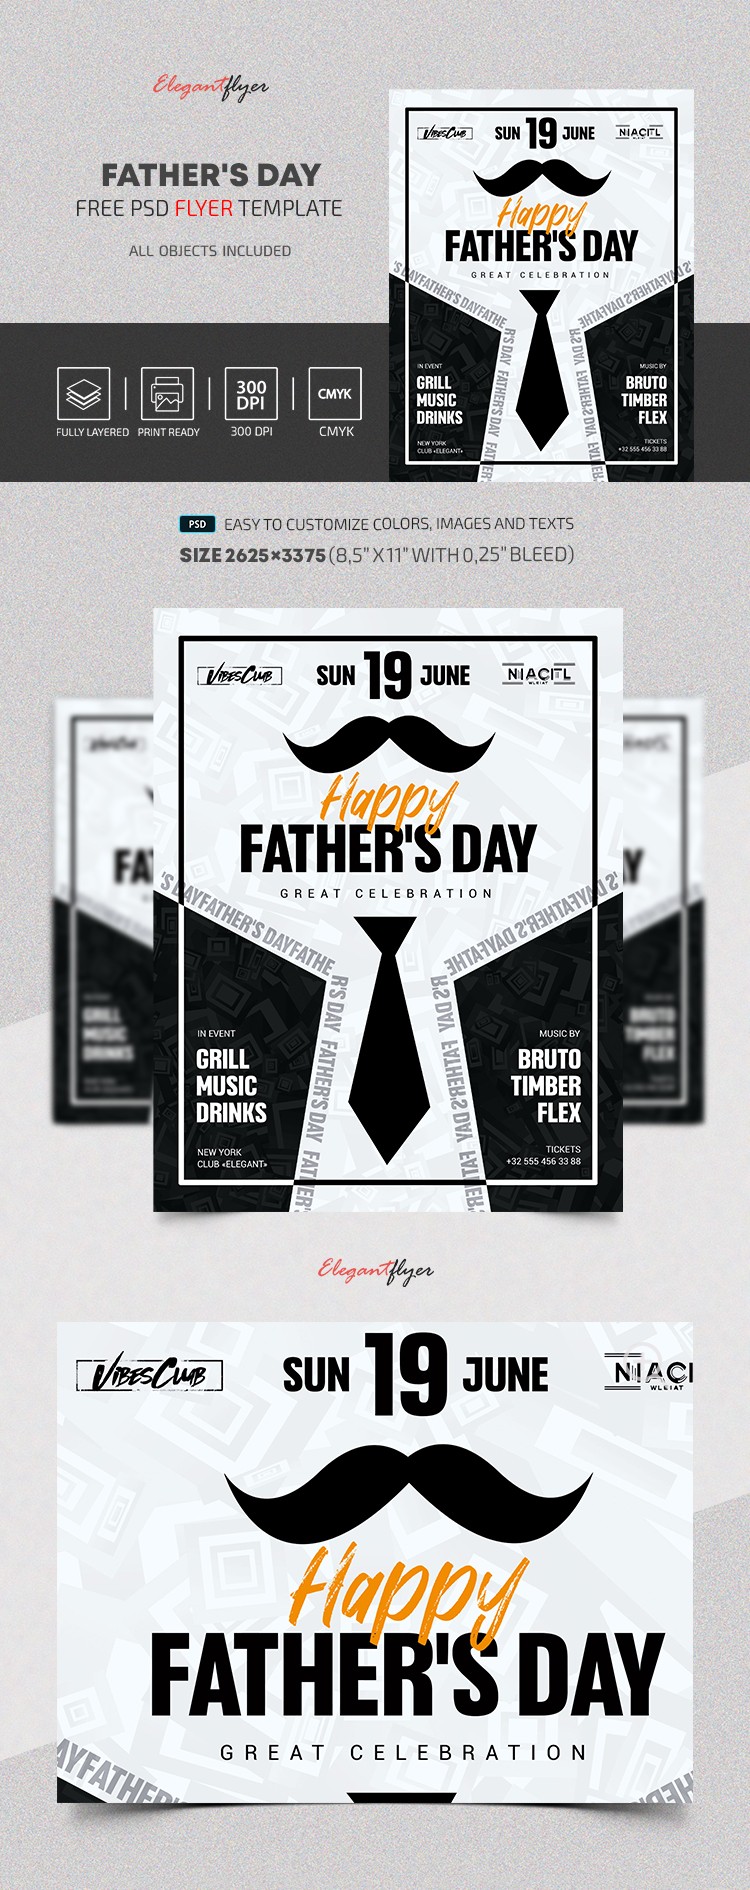 Father's Day - Free Flyer PSD Template by ElegantFlyer